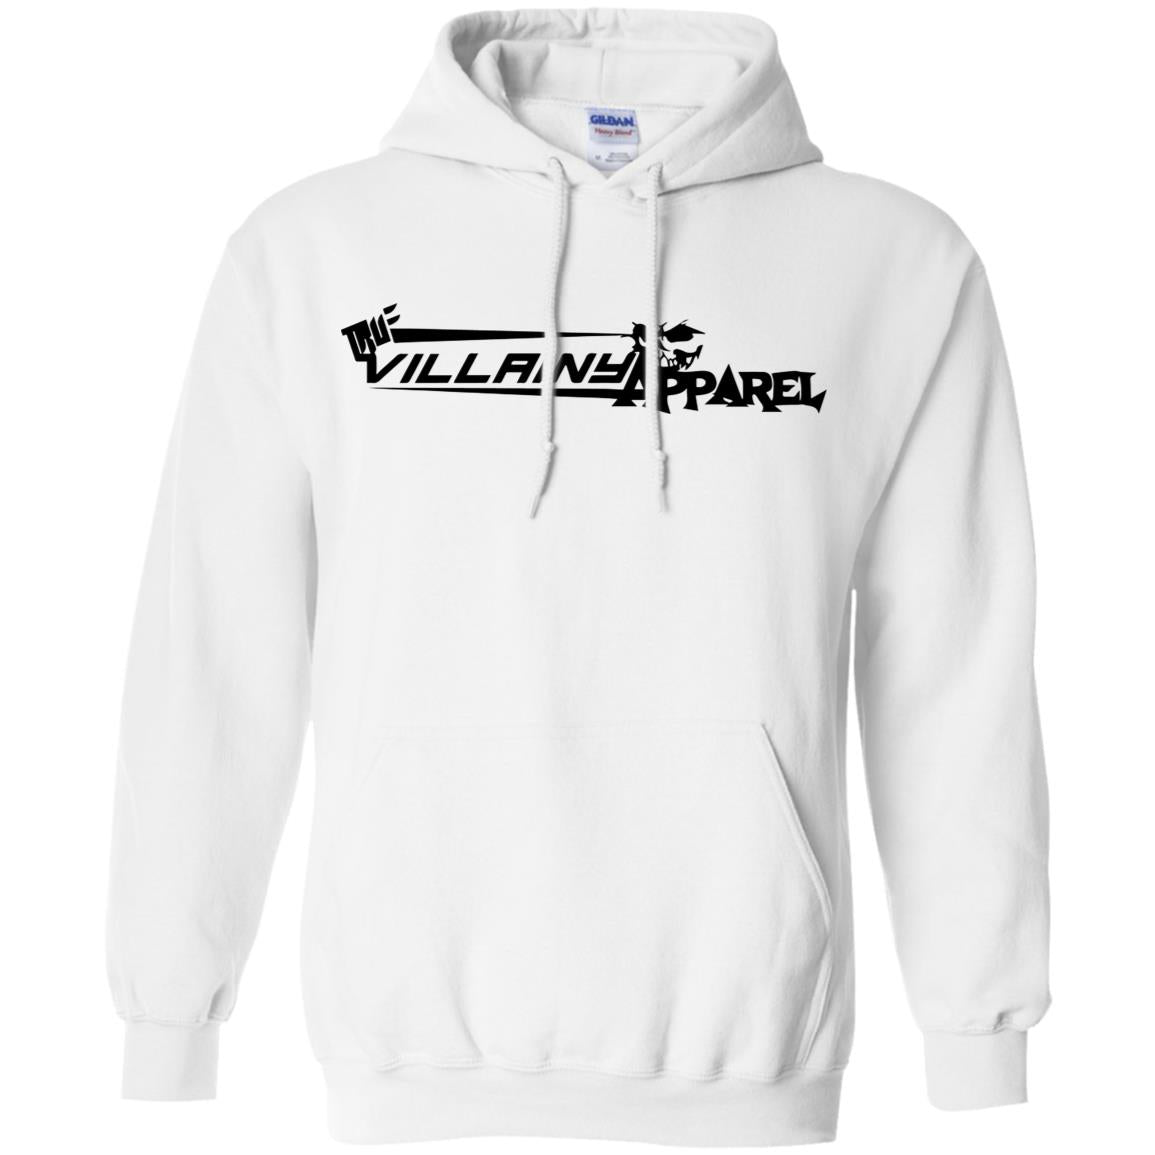 True Villainy Apparel Pullover Hoodie ( Multiple Colors)